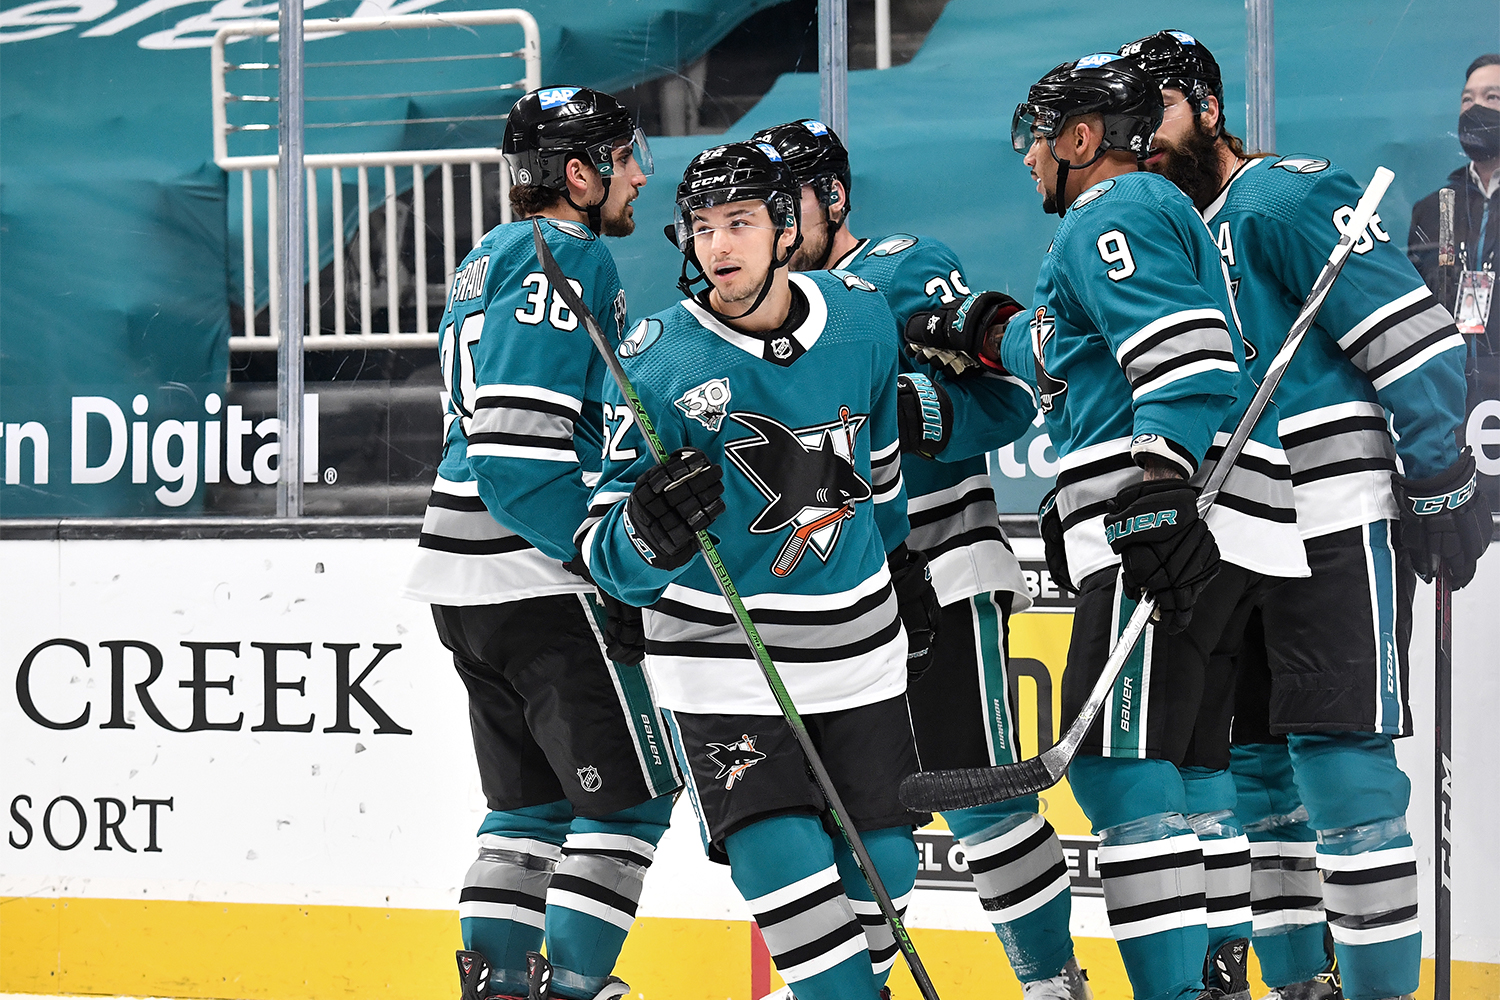 Kevin Labanc #62, Brent Burns #88, Logan Couture #39, Mario Ferraro #38 and Evander Kane #9 of the San Jose Sharks celebrate scoring a goal against the Los Angeles Kings at SAP Center on April 9, 2021